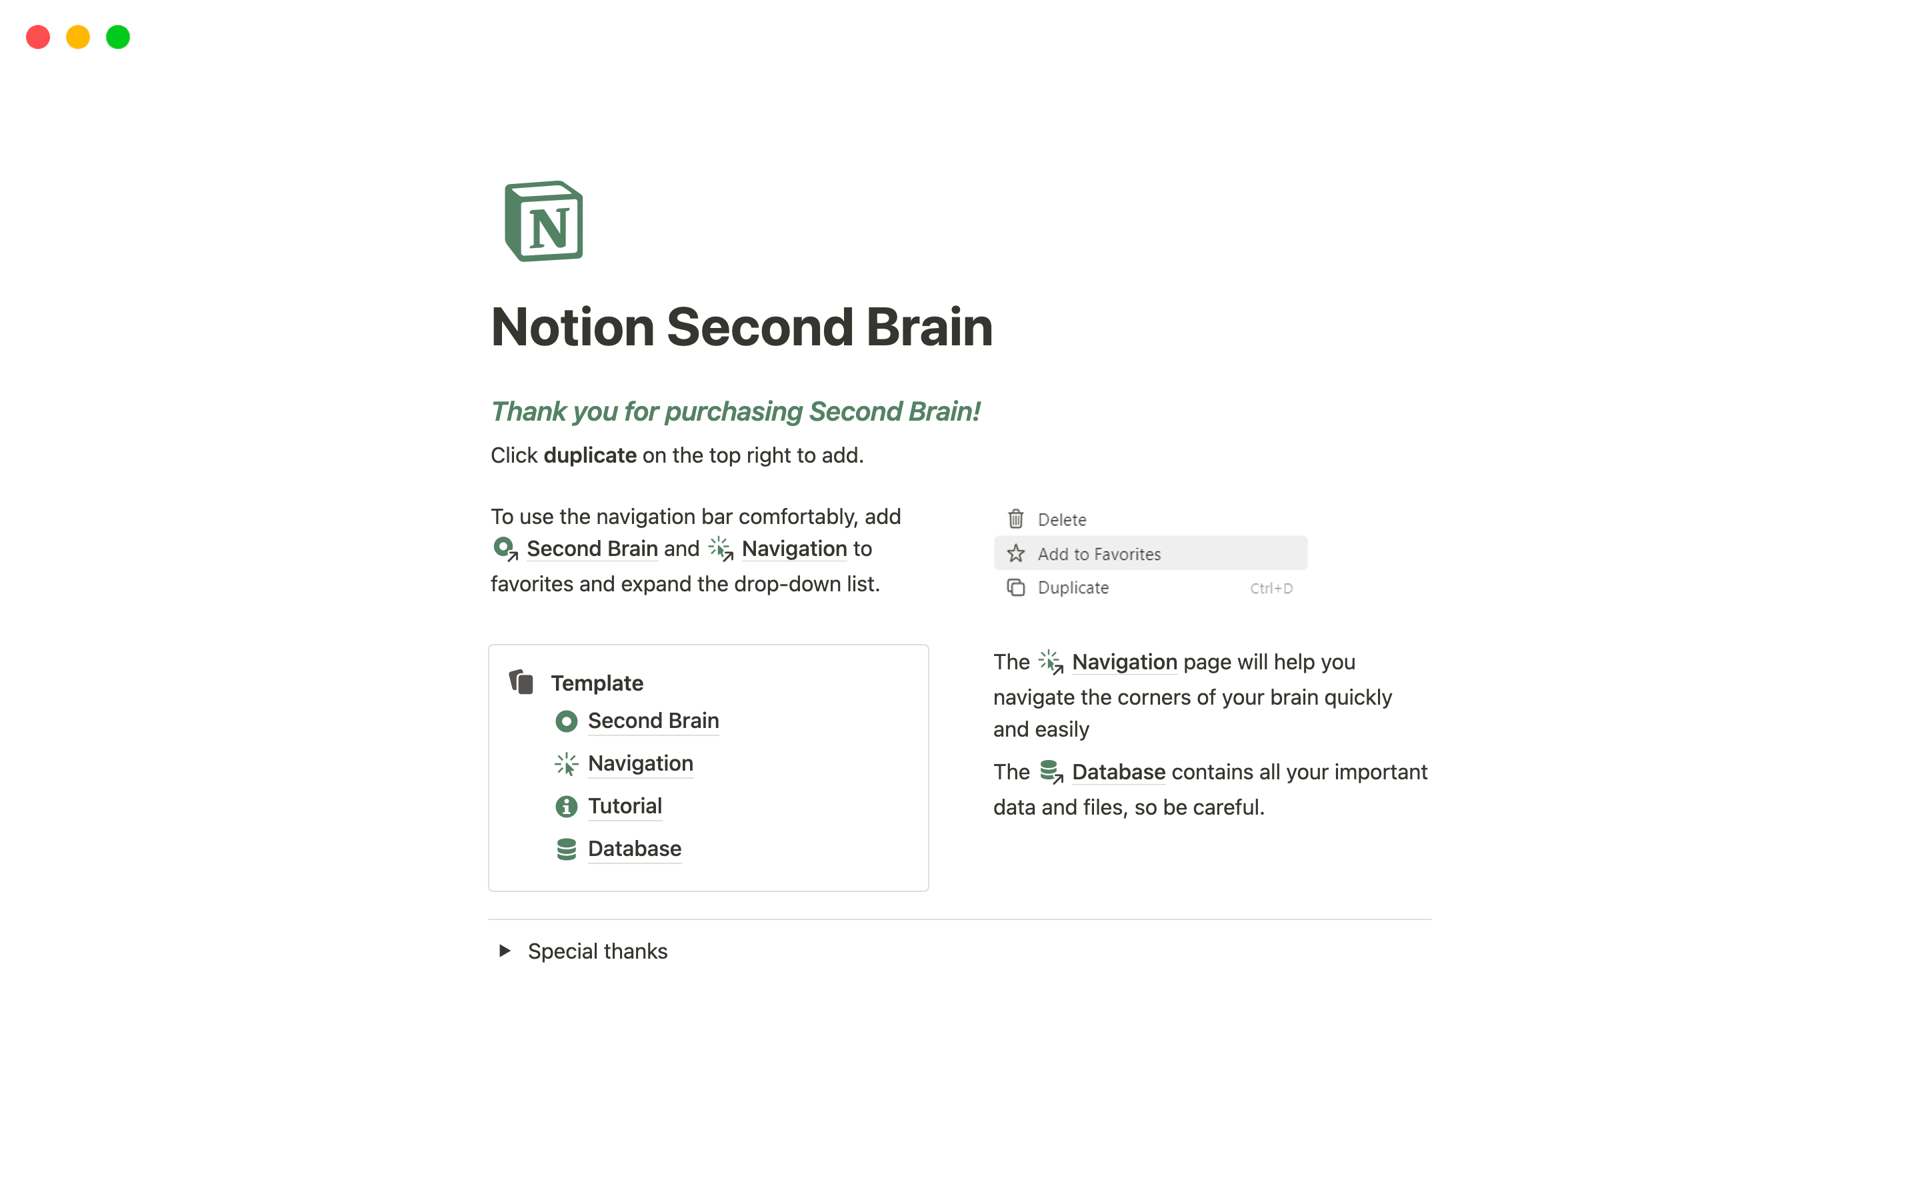 The Second Brain: a personal system for organizing resources and managing time. Features over 30 databases, PARA Method, project/task management, daily overview, quick capture, and Eisenhower Matrix. Clear, intuitive interface without unnecessary clutter or confusion.